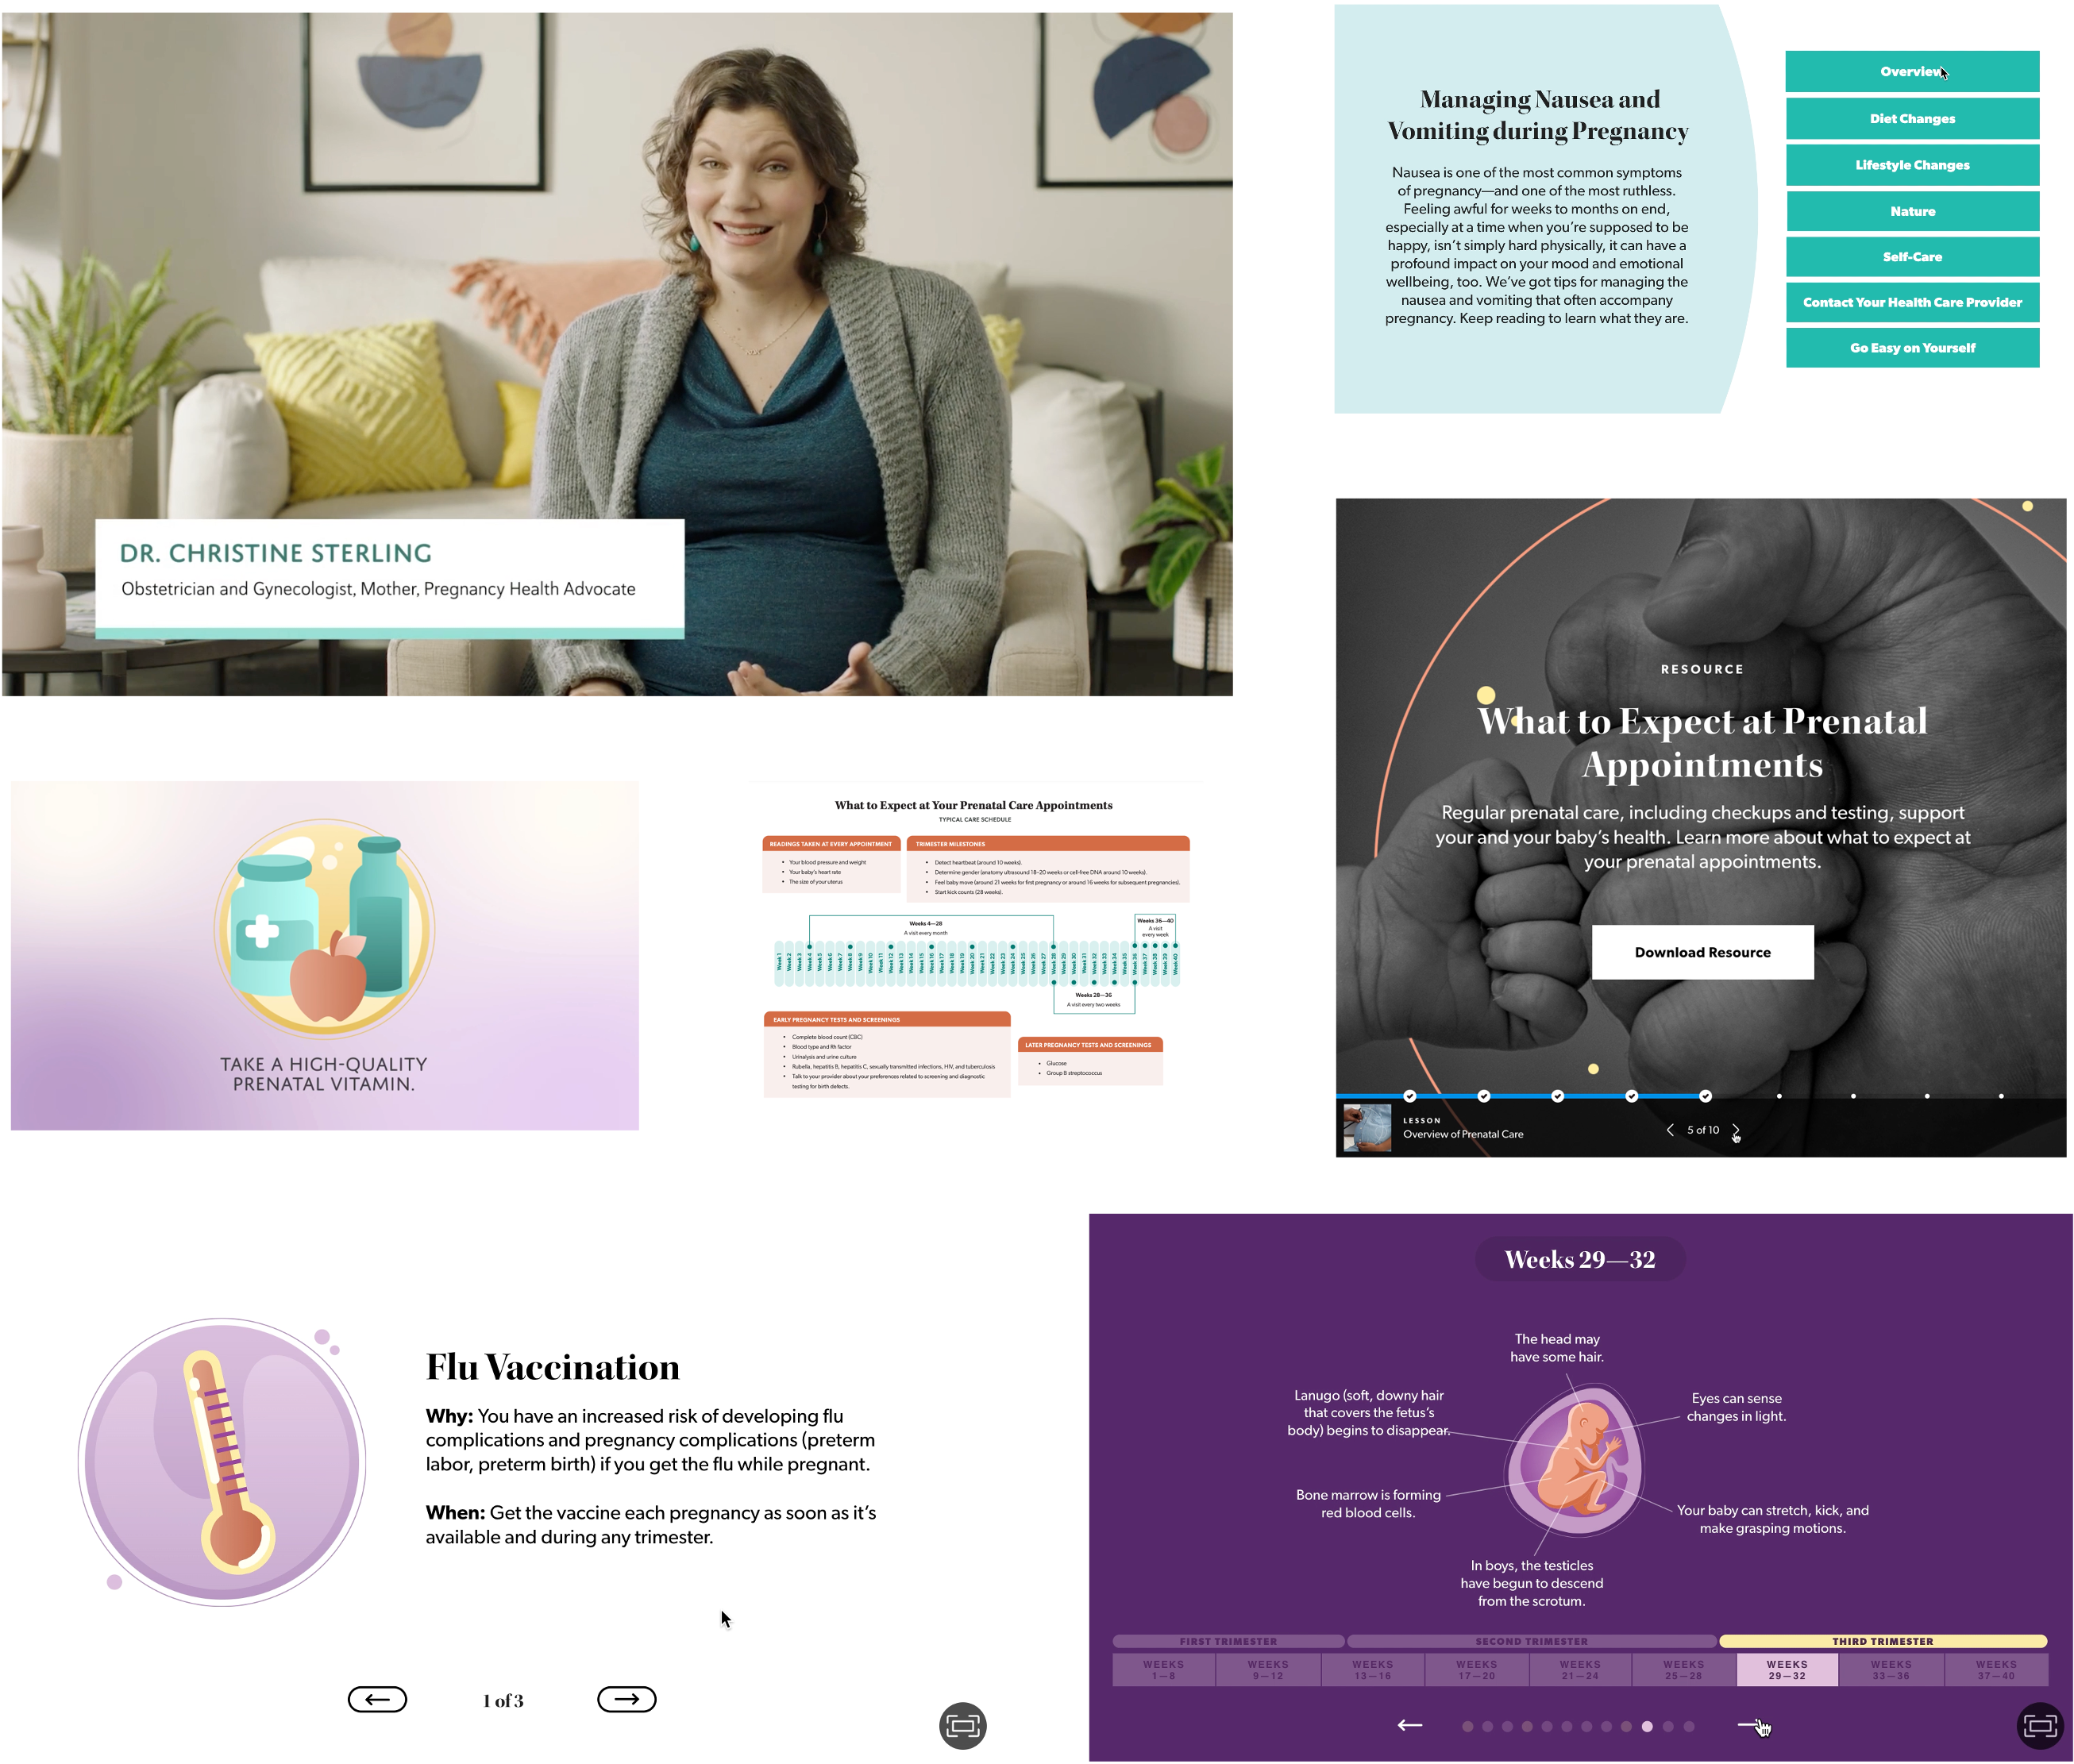 Overview of mPulse Mobile’s prenatal and postpartum solution